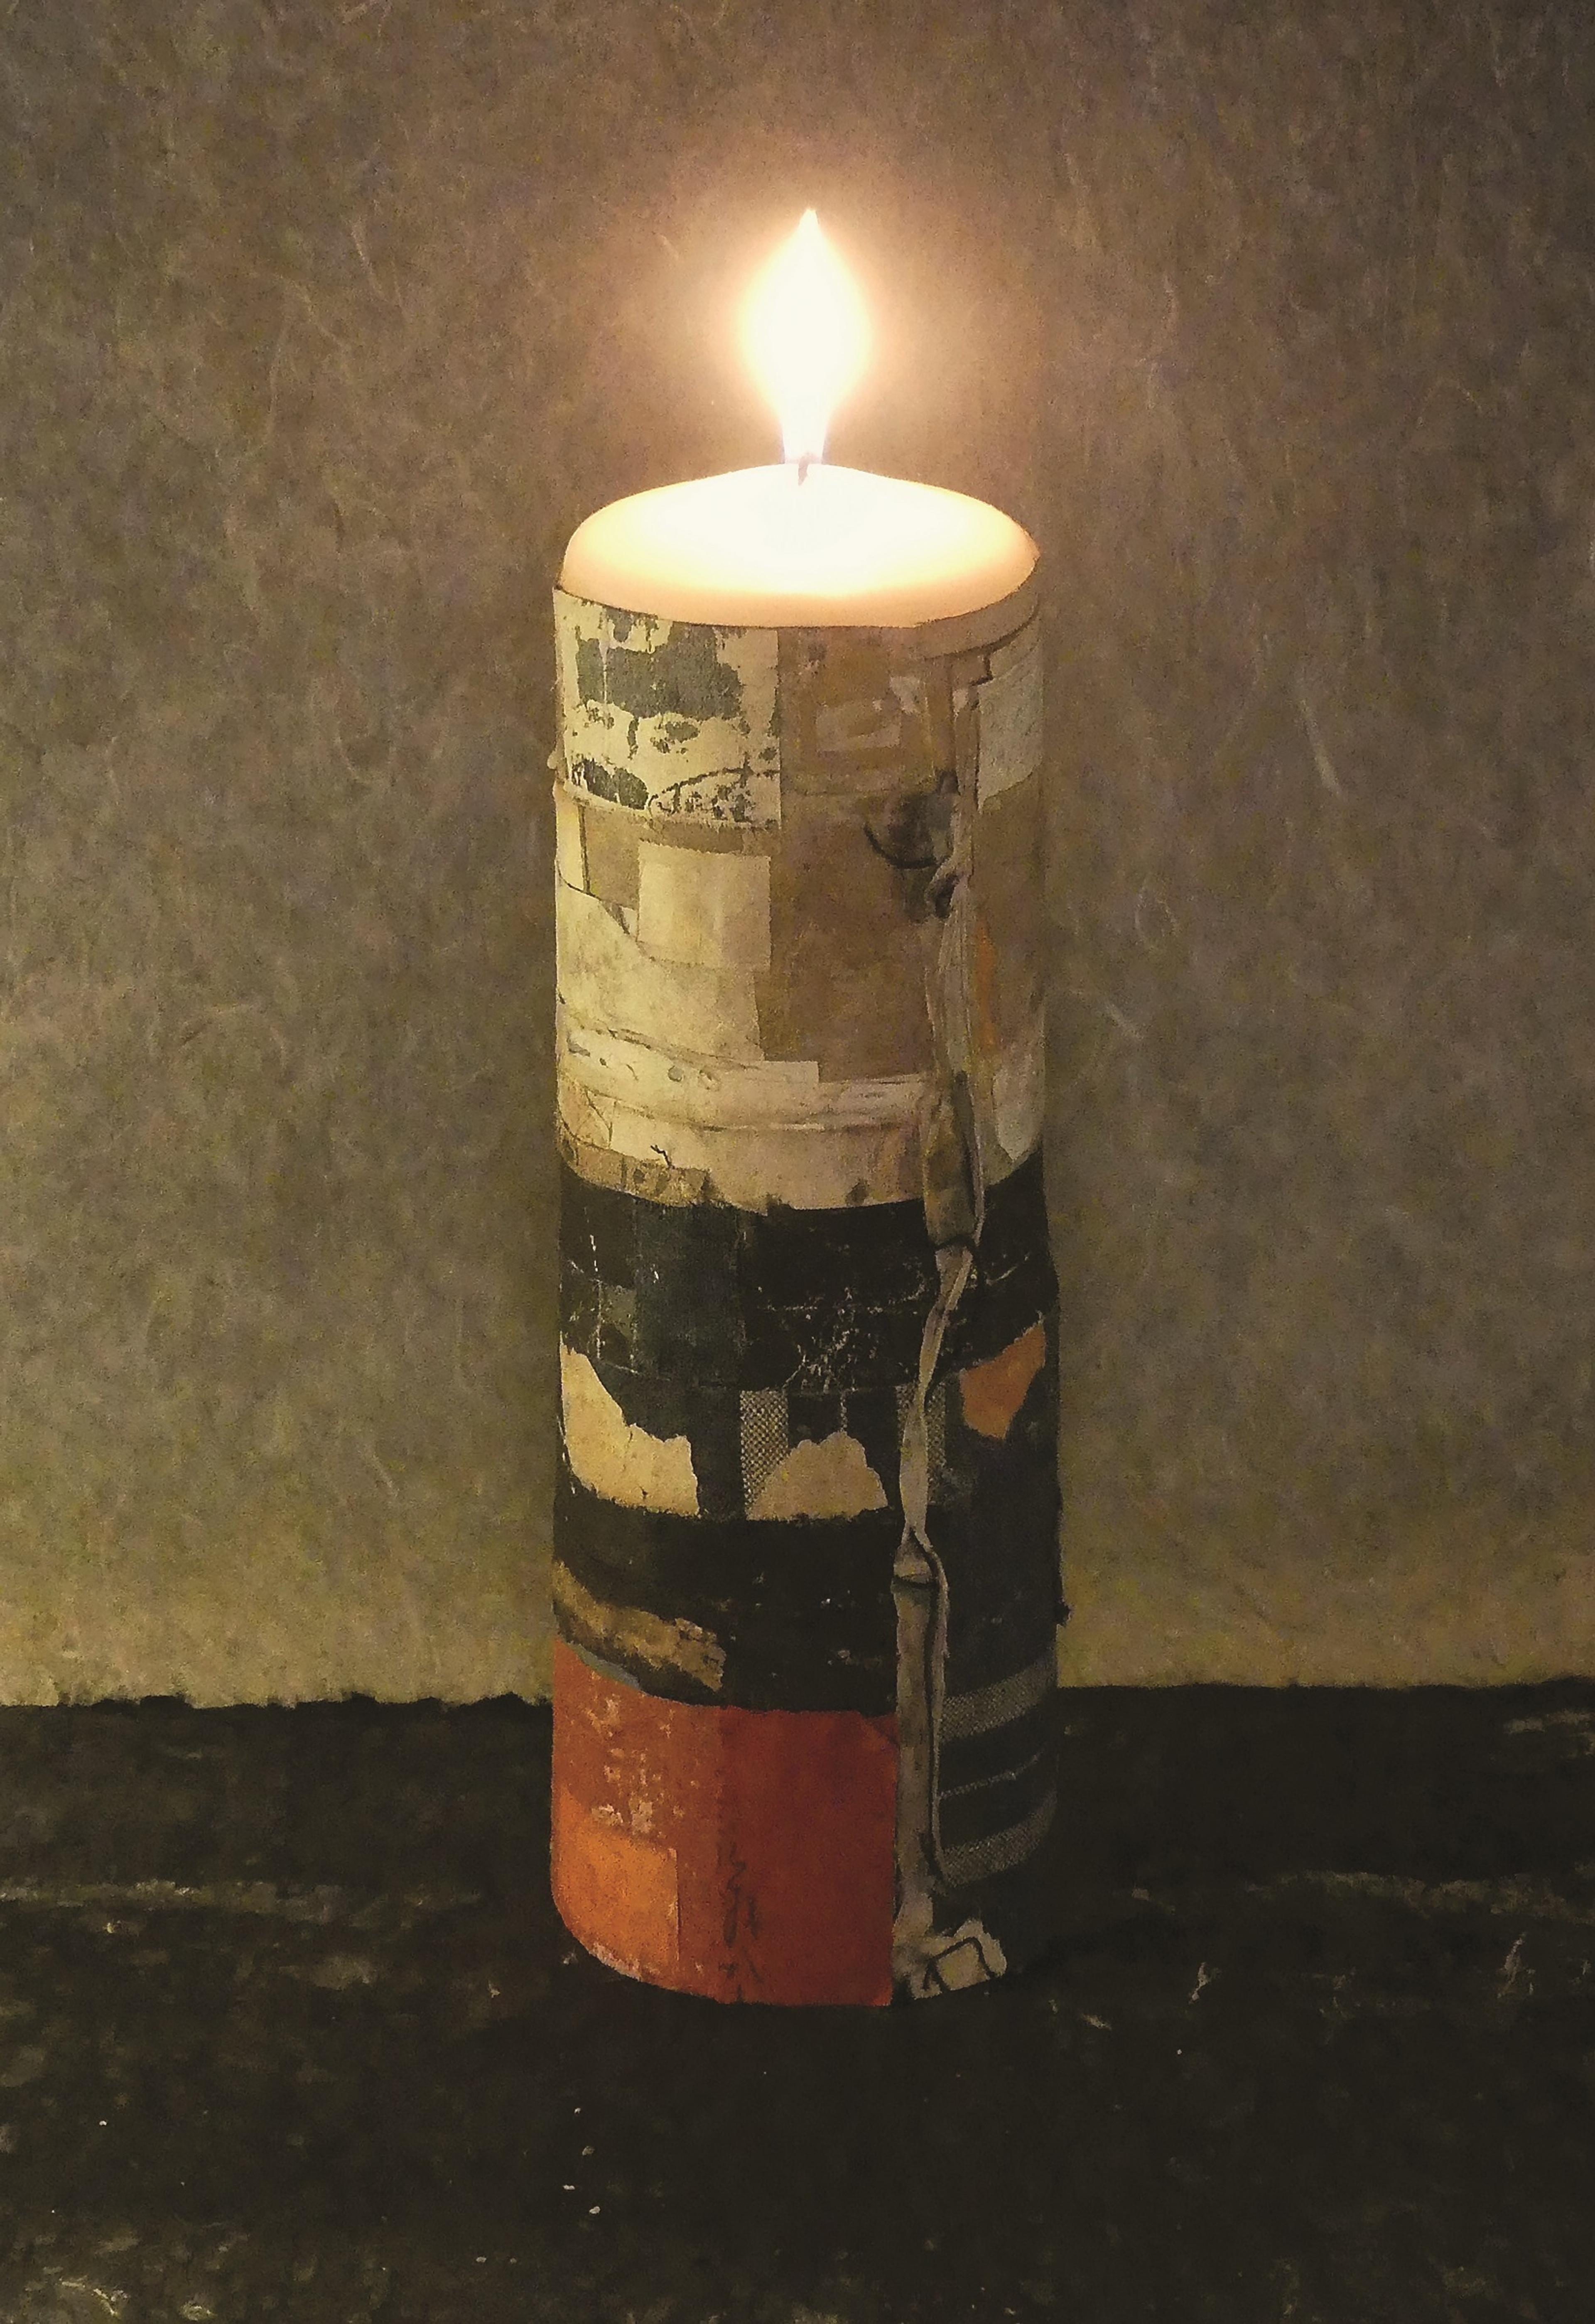 Collaged illustration of a candle